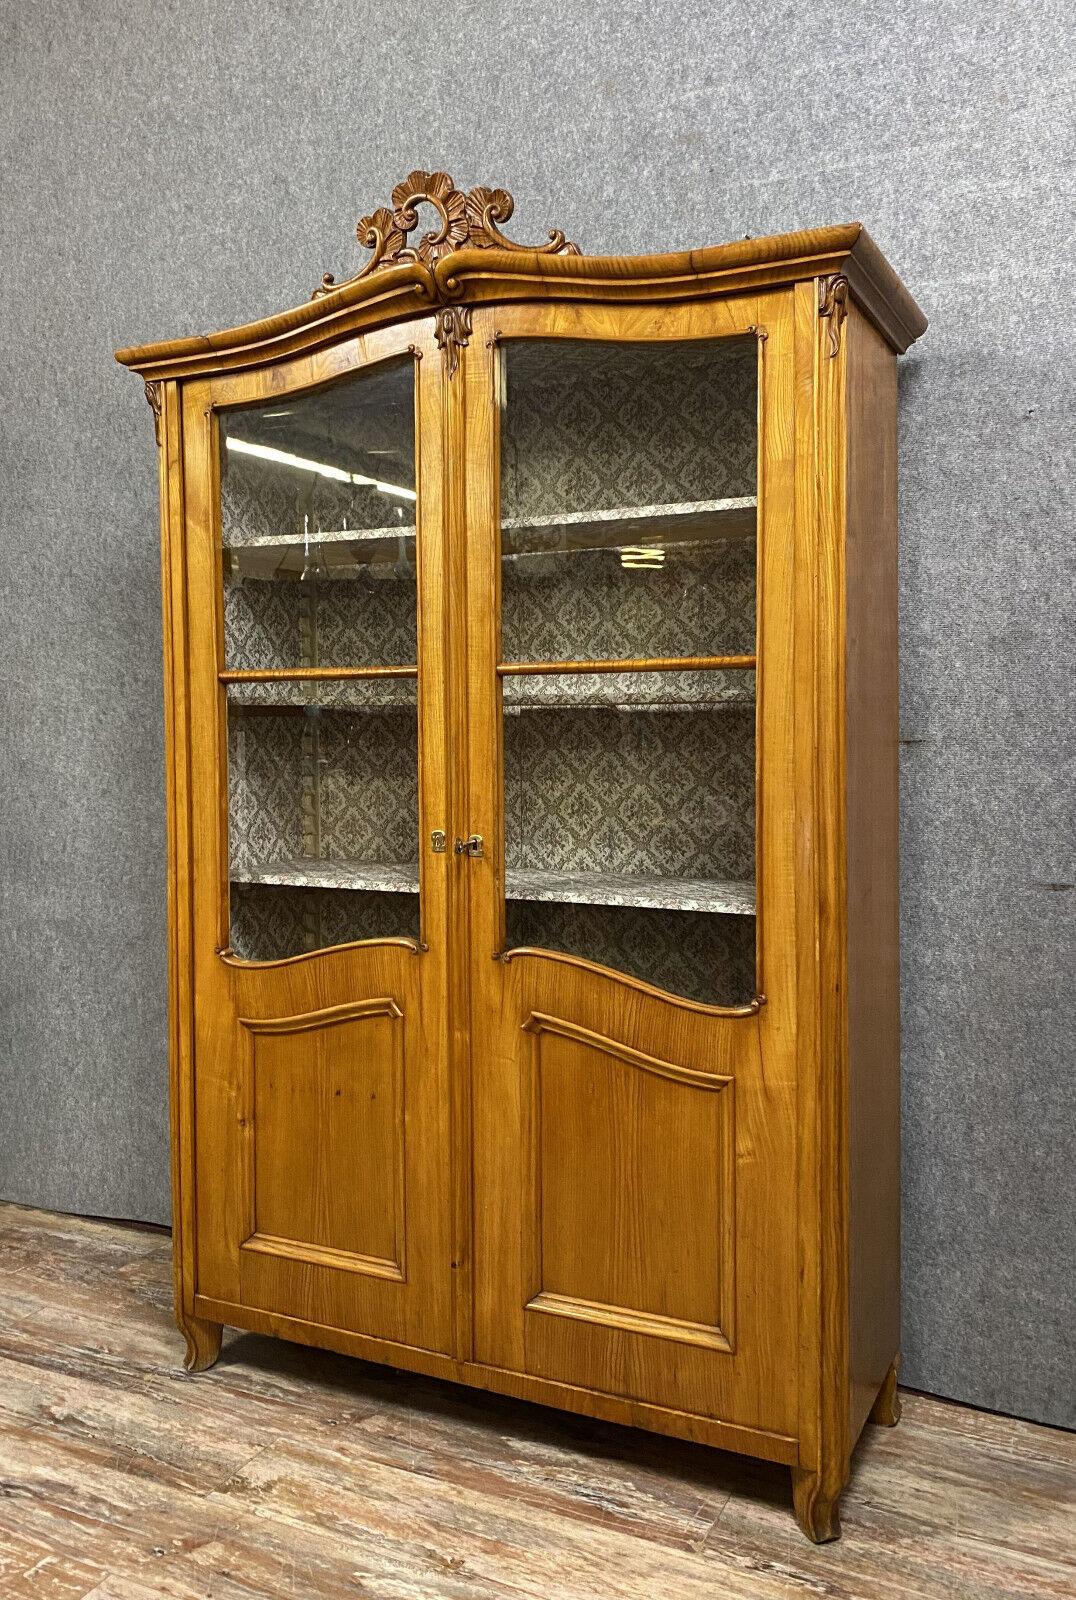 Immerse yourself in the elegance of the 18th century with this exceptional and rare Louis XV light wood bookcase, crafted around 1800. Its exquisite design features a facade adorned with paneled and glazed doors, offering a glimpse into its